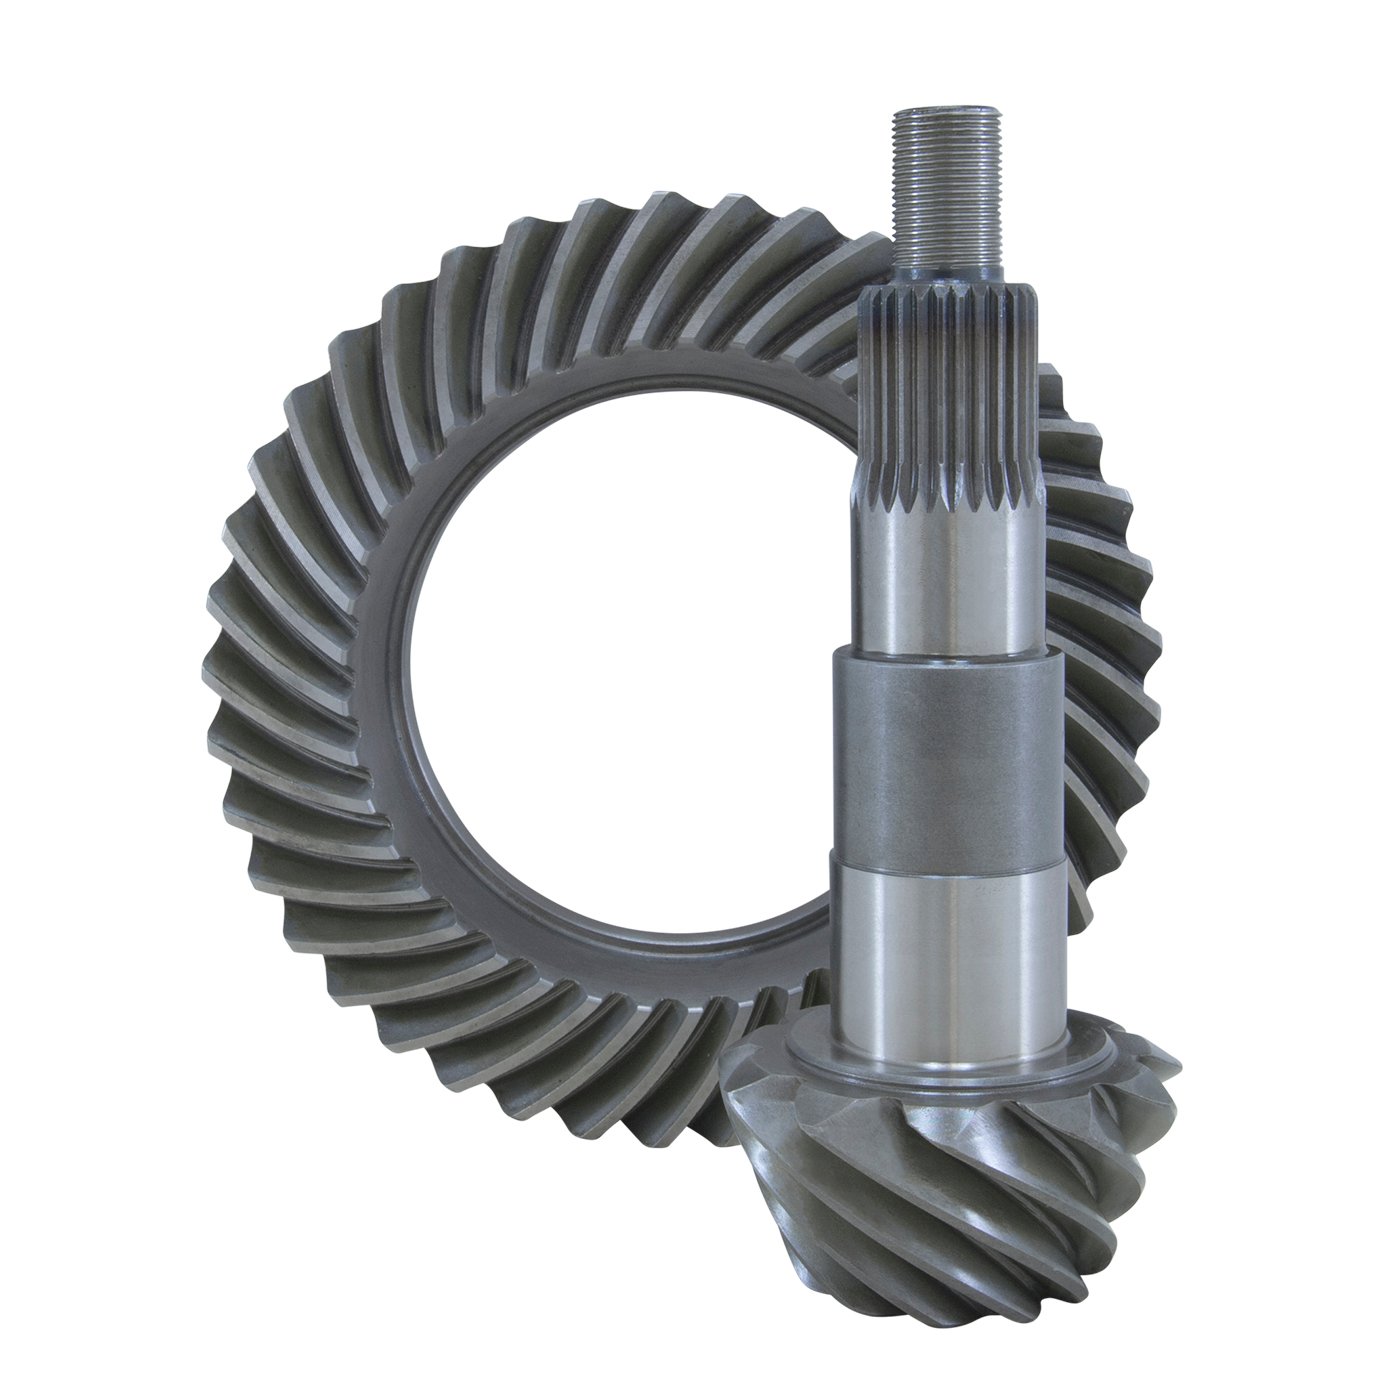 USA Standard ZG F7.5-411 Ring & Pinion Gear Set, For Ford 7.5 in., 4.11 Ratio.